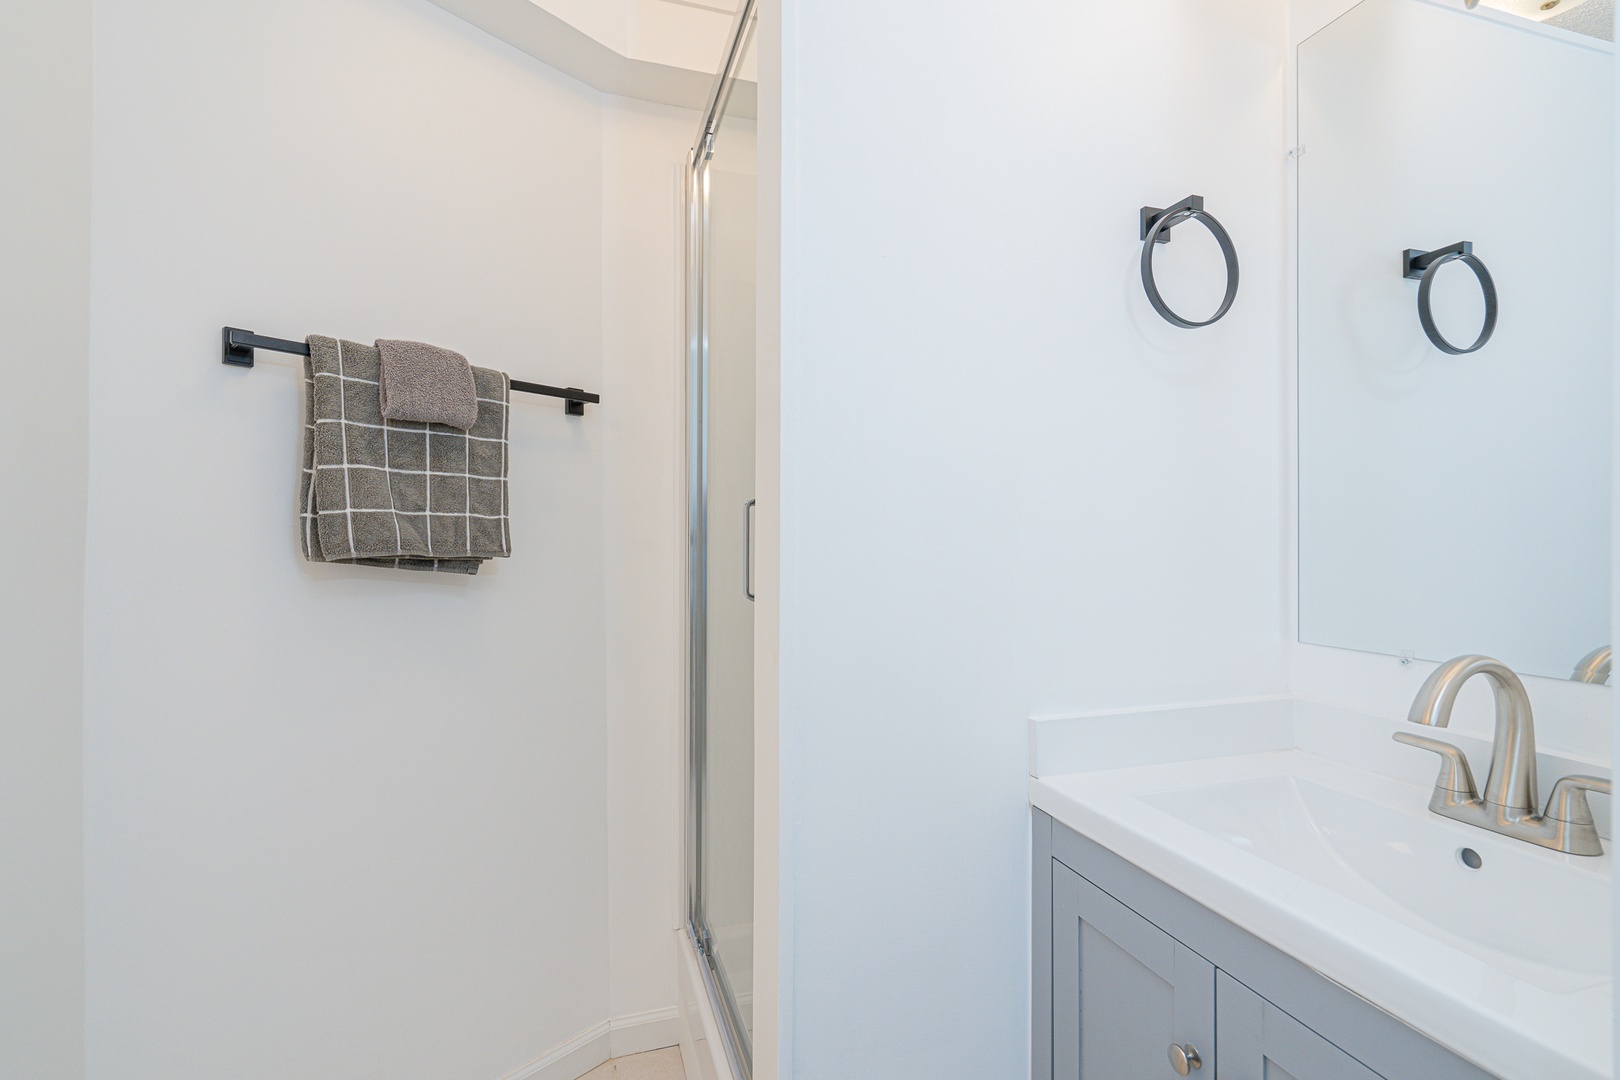 The king ensuite features a single vanity & glass shower